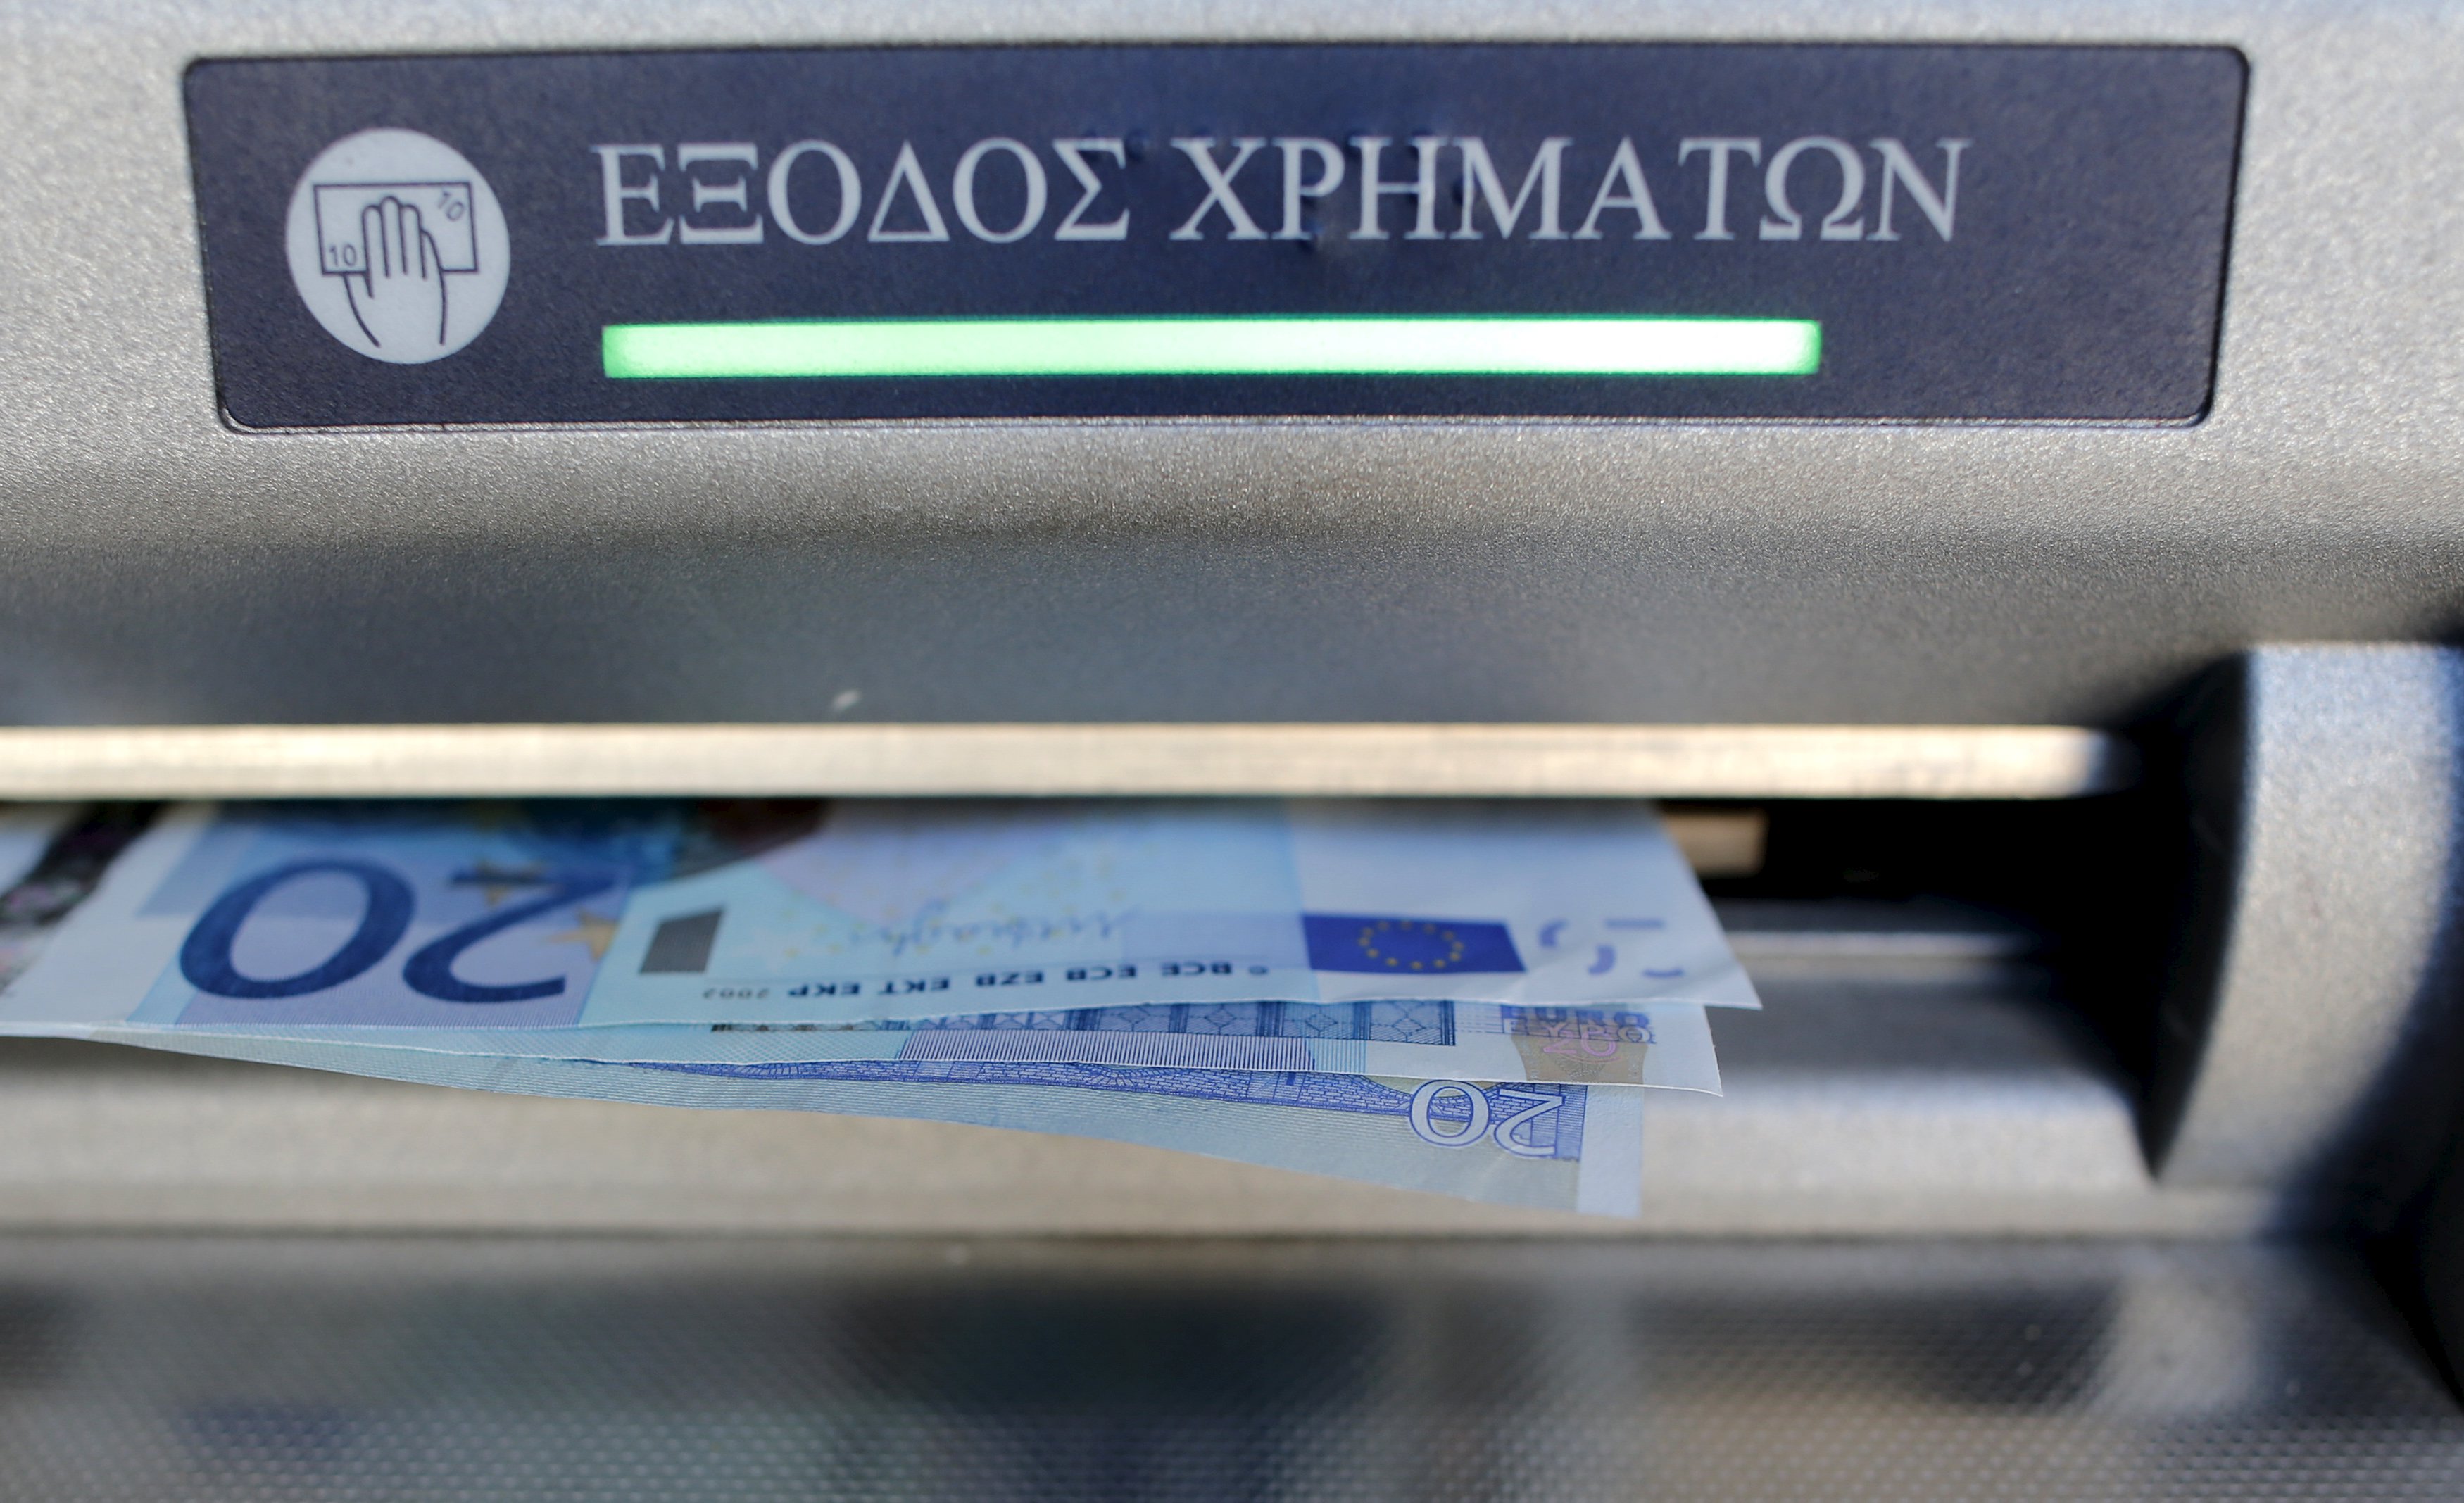 Capital controls rollback, cash withdrawals of up to 2,300 euros monthly